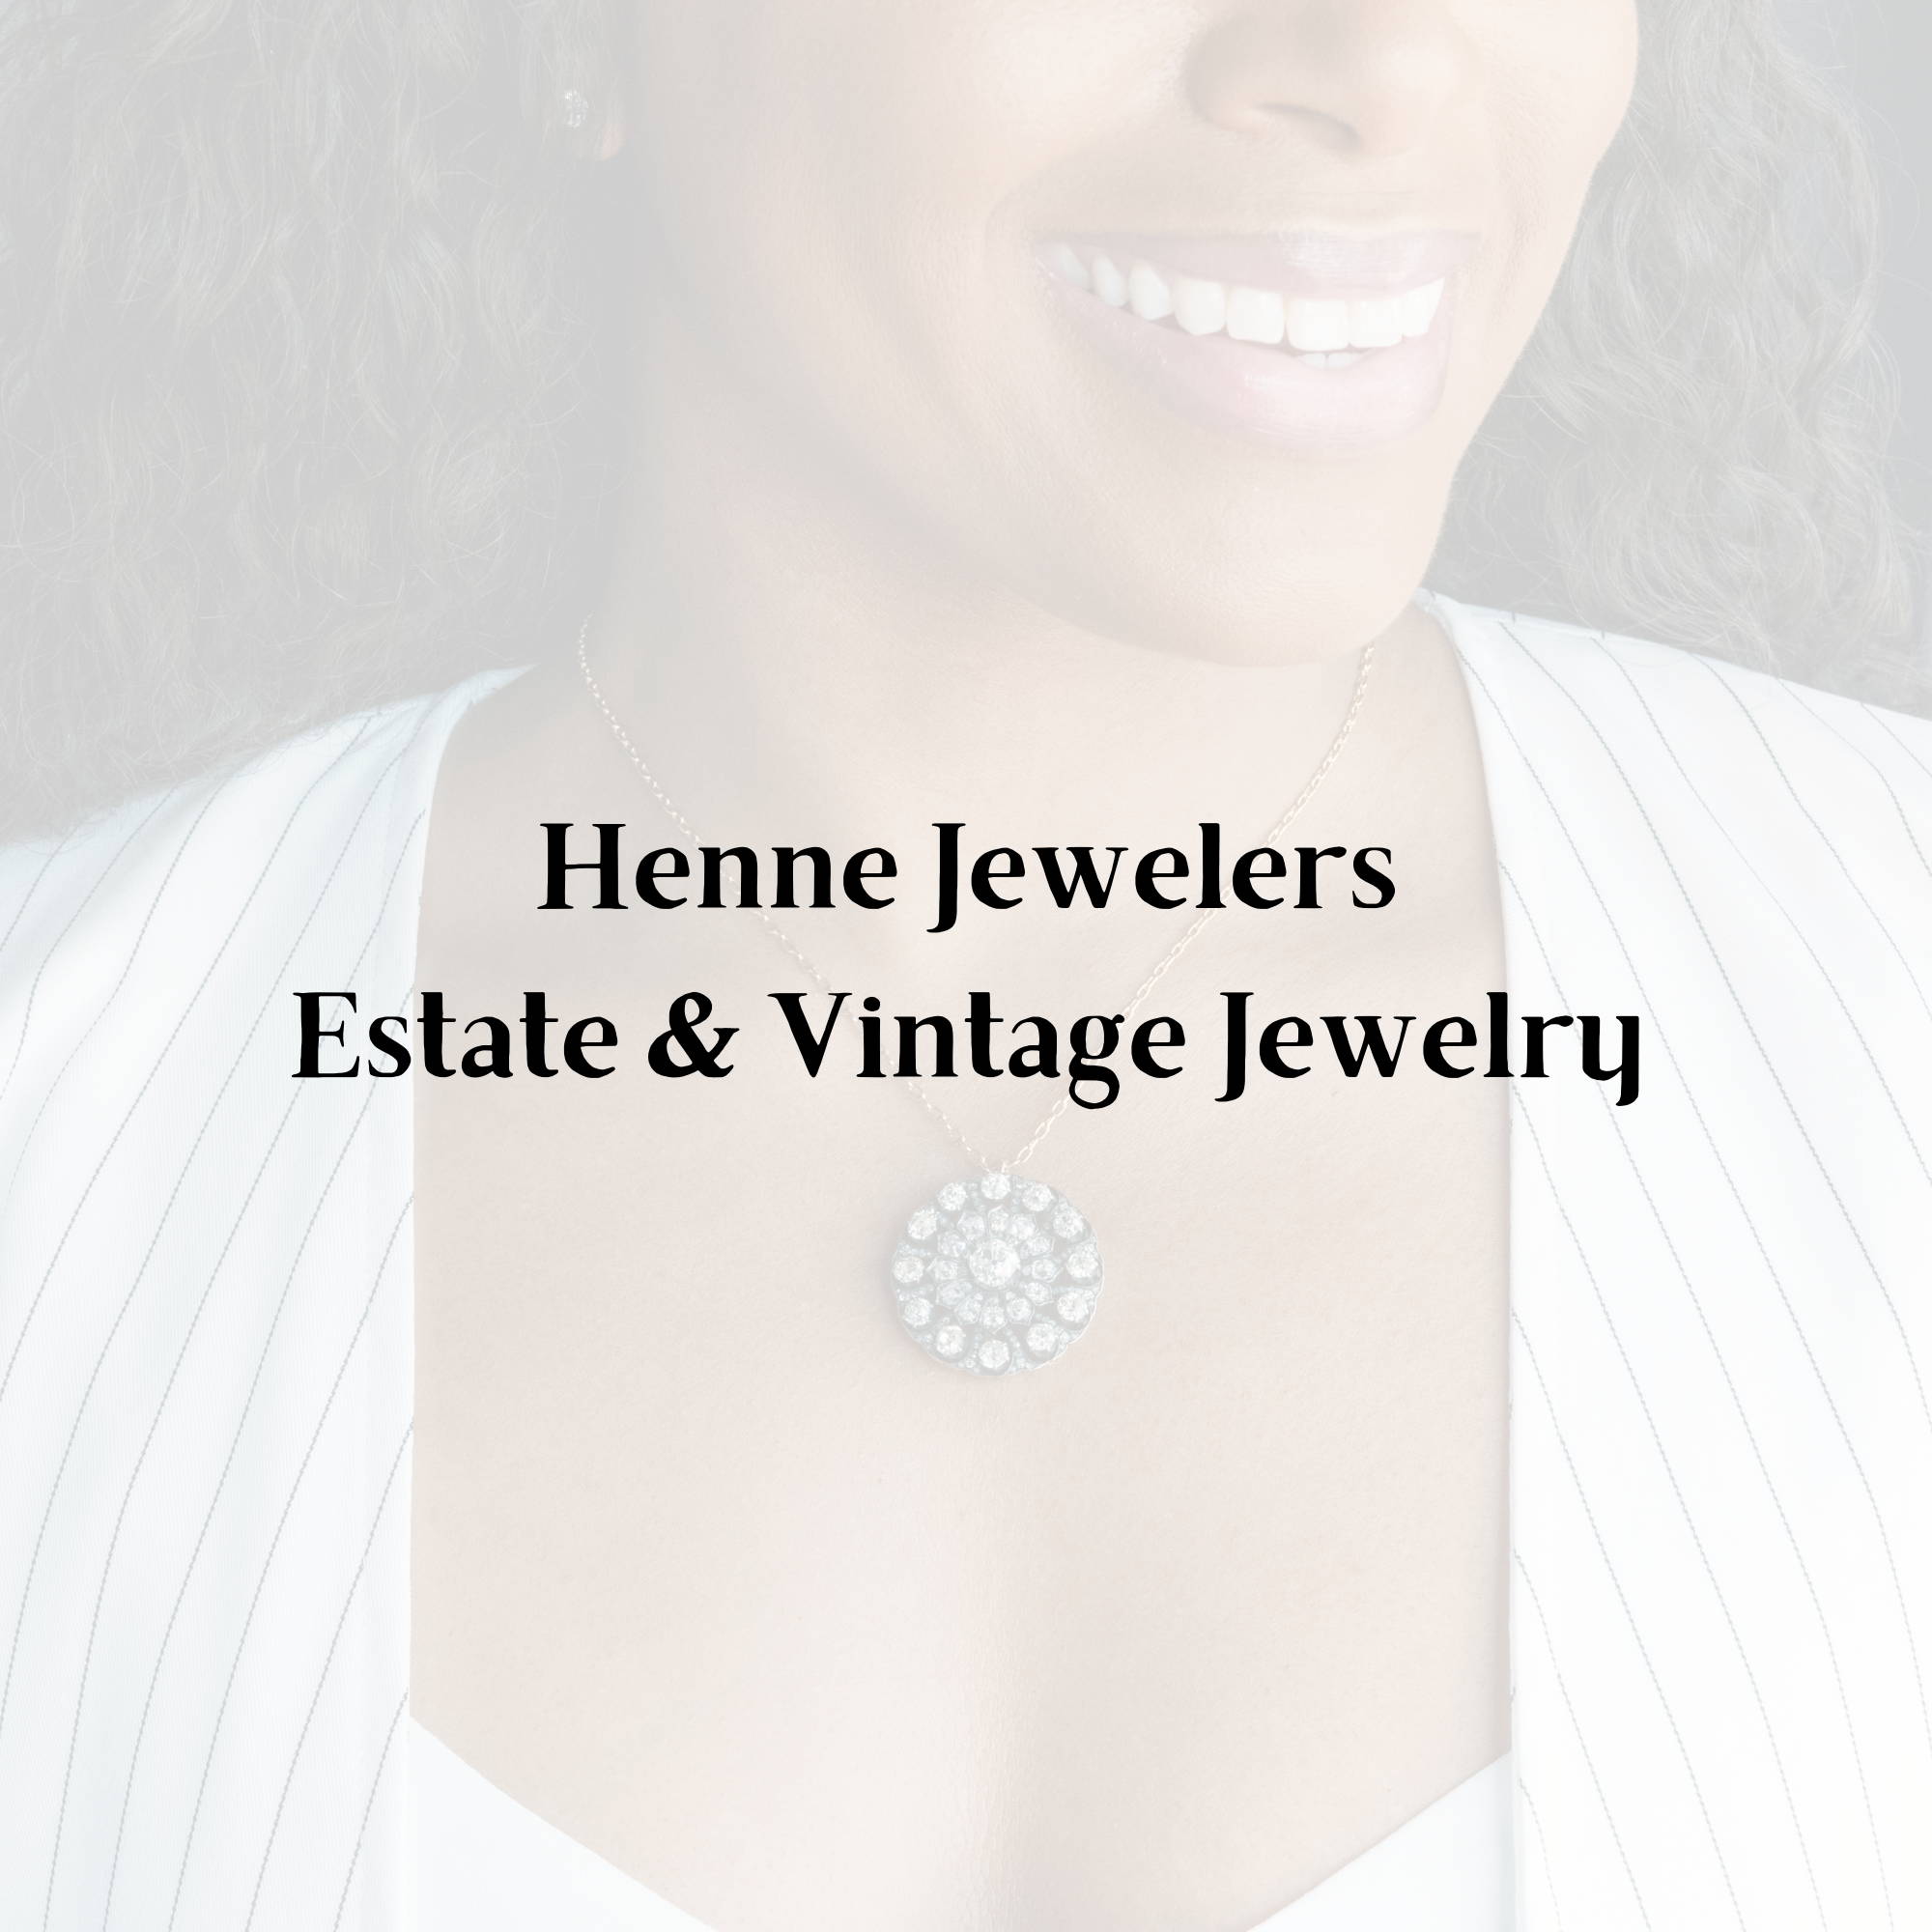 Henne Jewelers estate and vintage jewelry